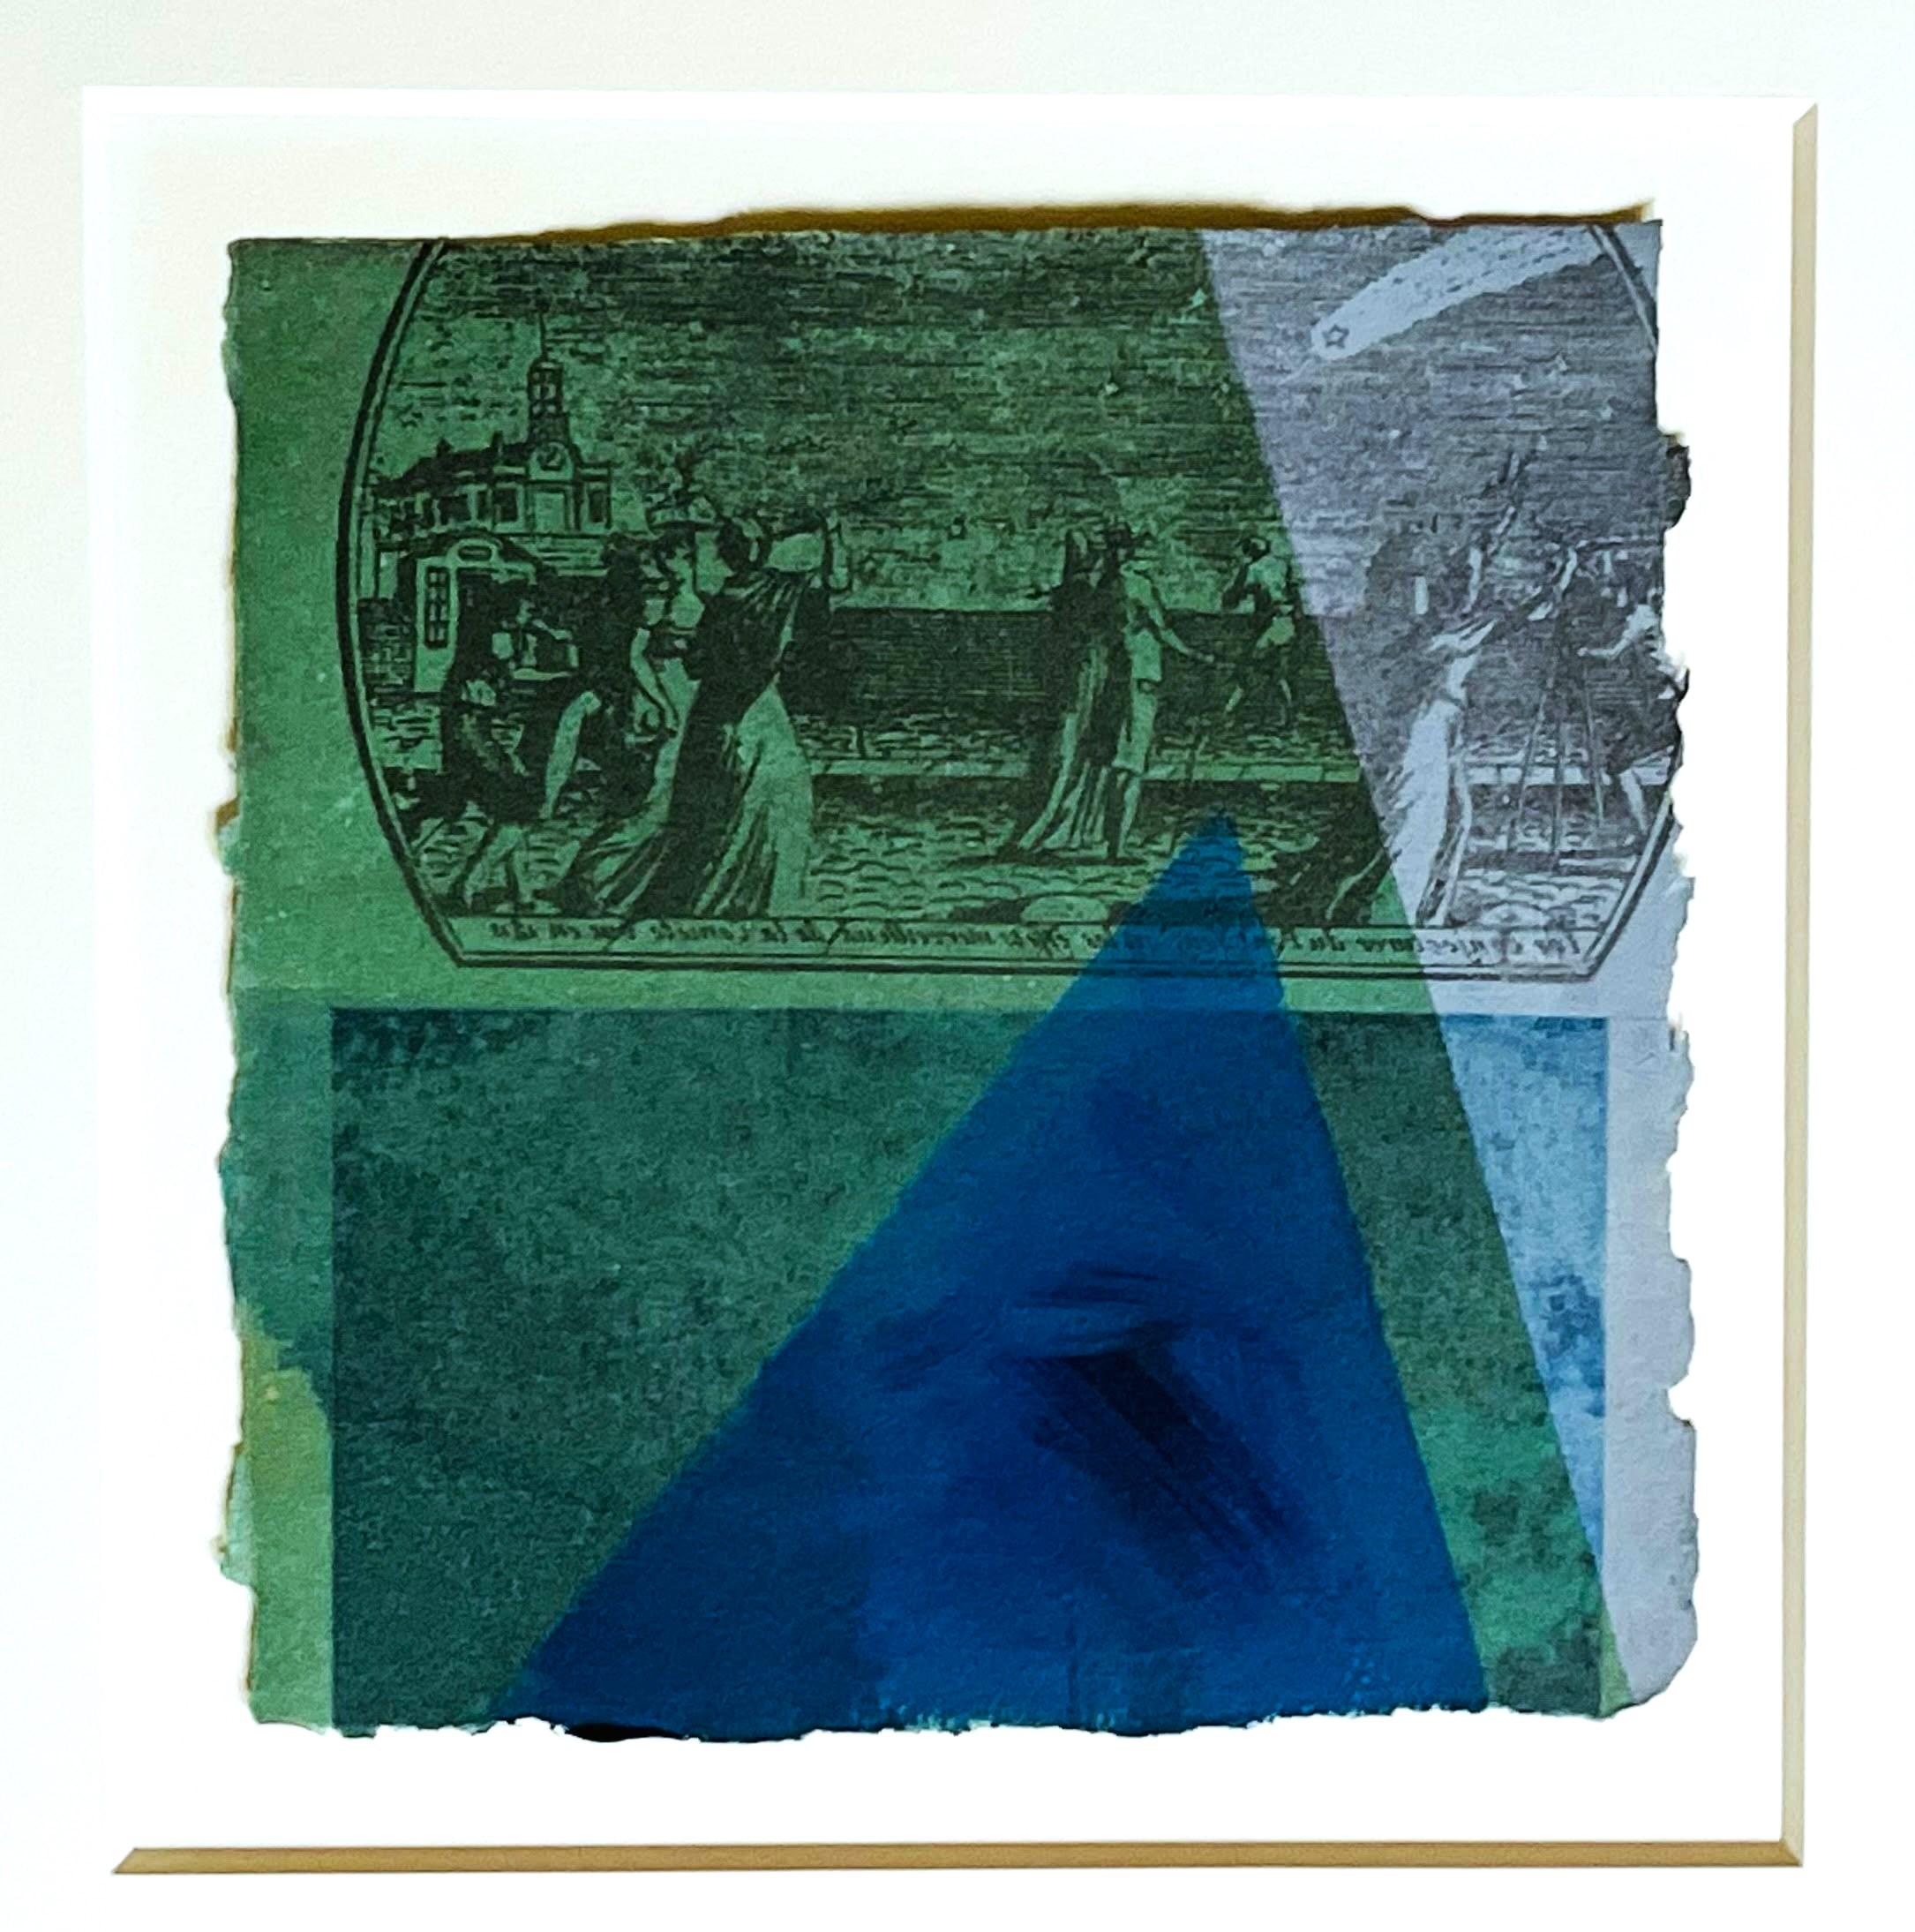 Robert Rauschenberg
'Snowflake Crime XIX', from the ACE Gallery Collection, 1981
Solvent transfer, acrylic and fabric collage on handmade paper with deckled edges
Signed and dated '81 in permanent marker on the back; bears unique artist inventory